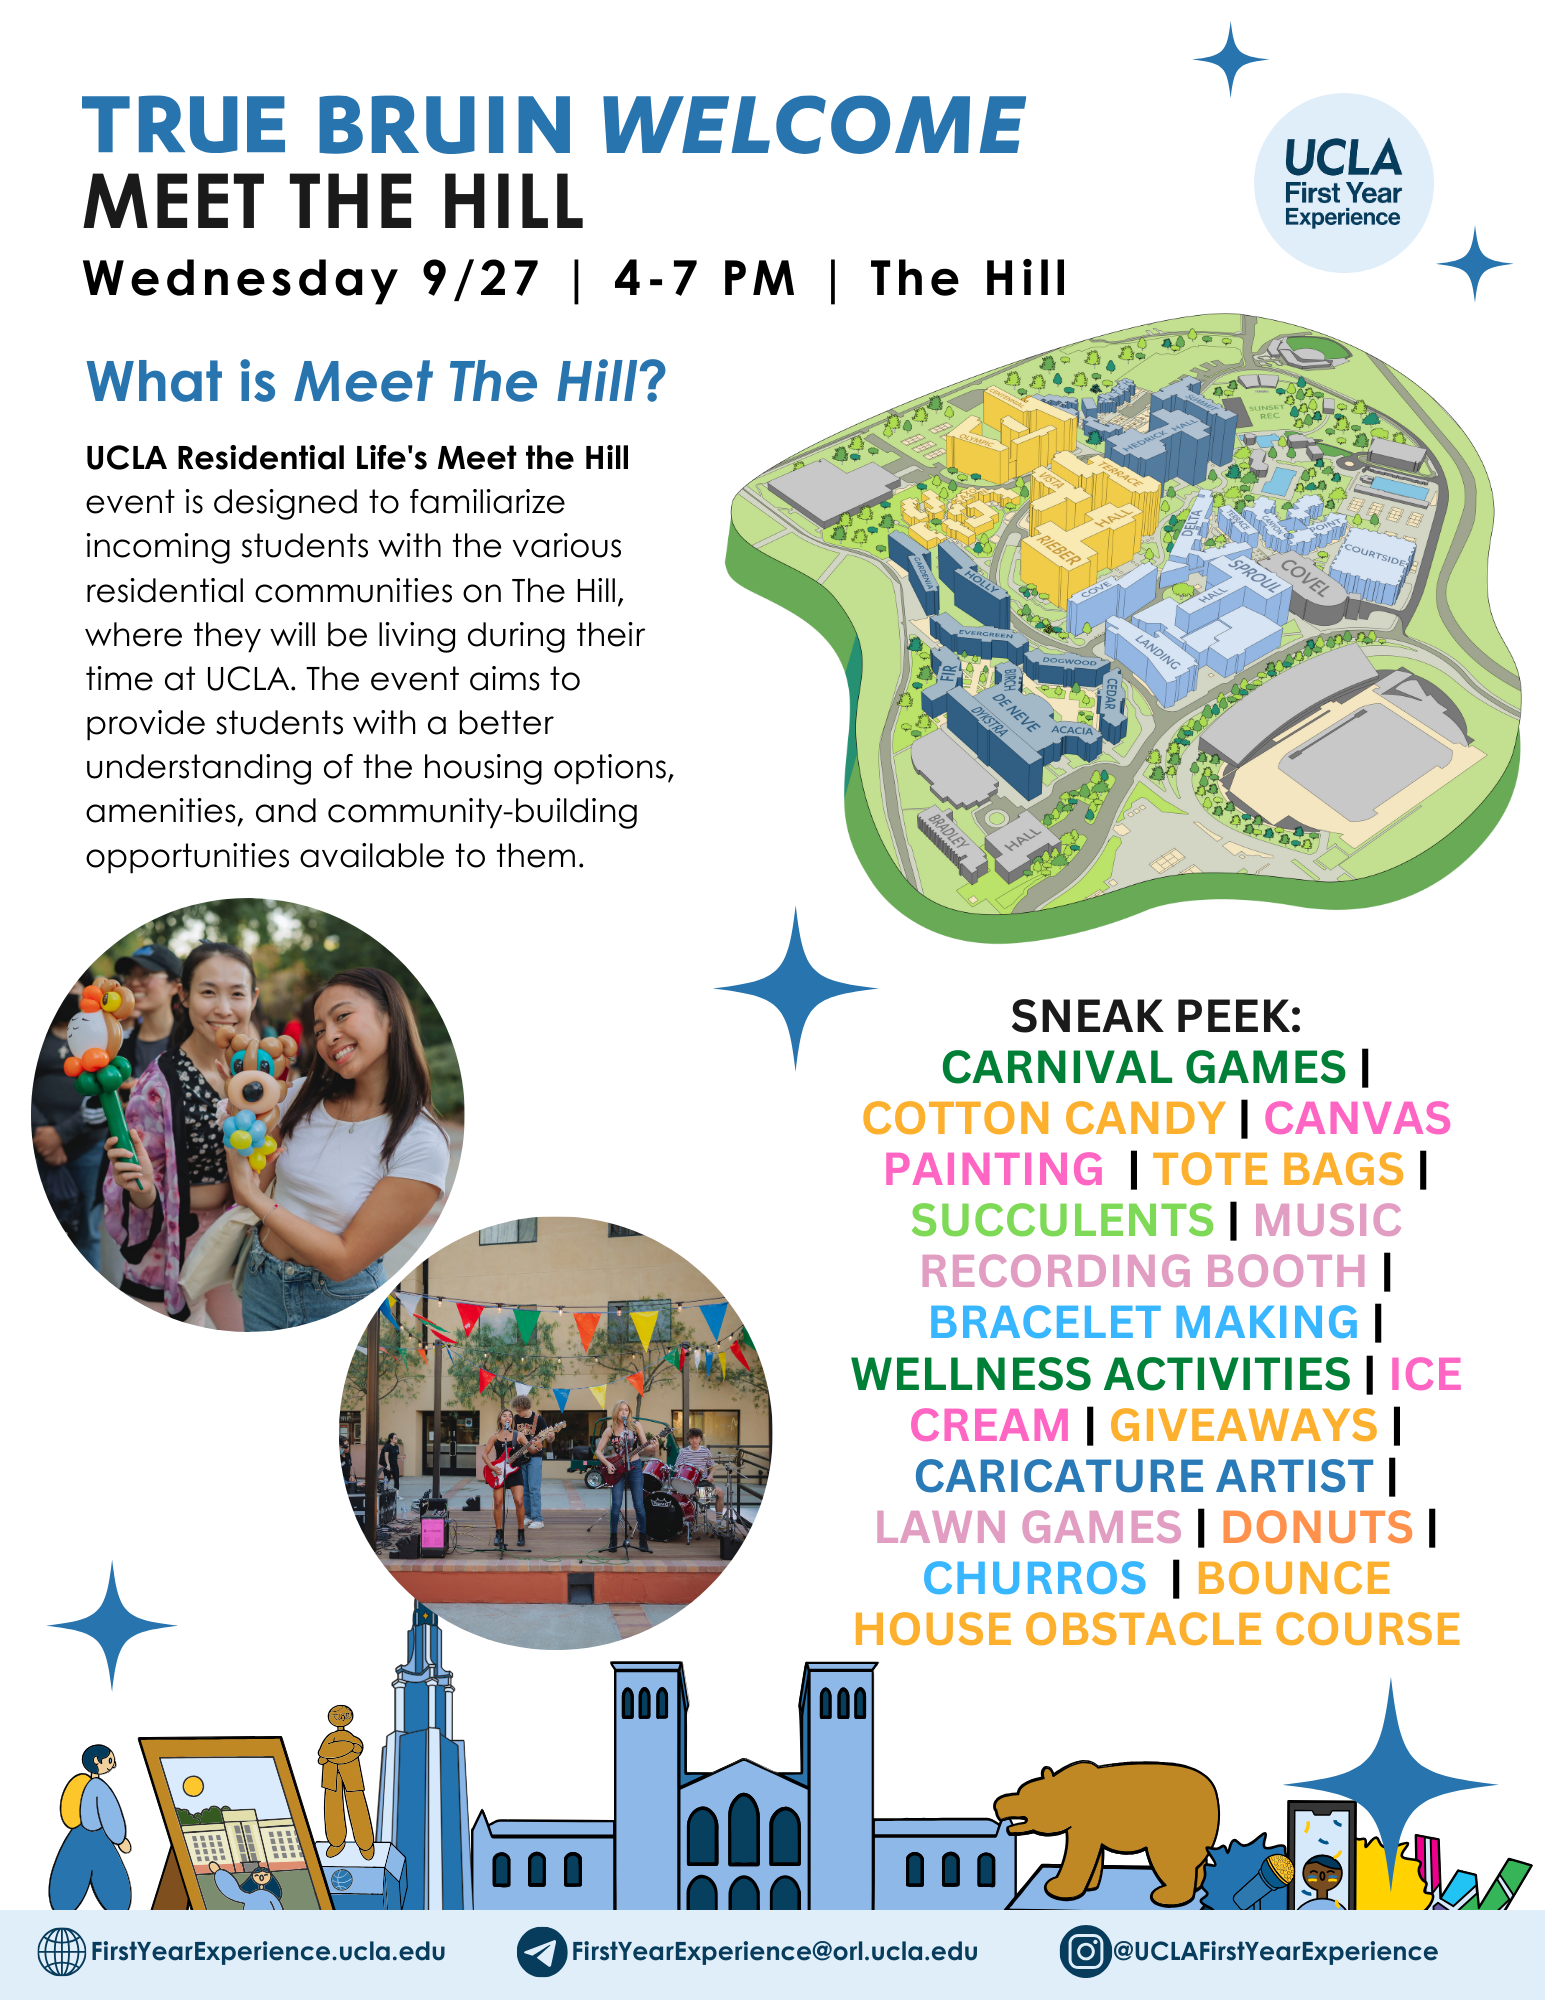 Information about Meet the Hill